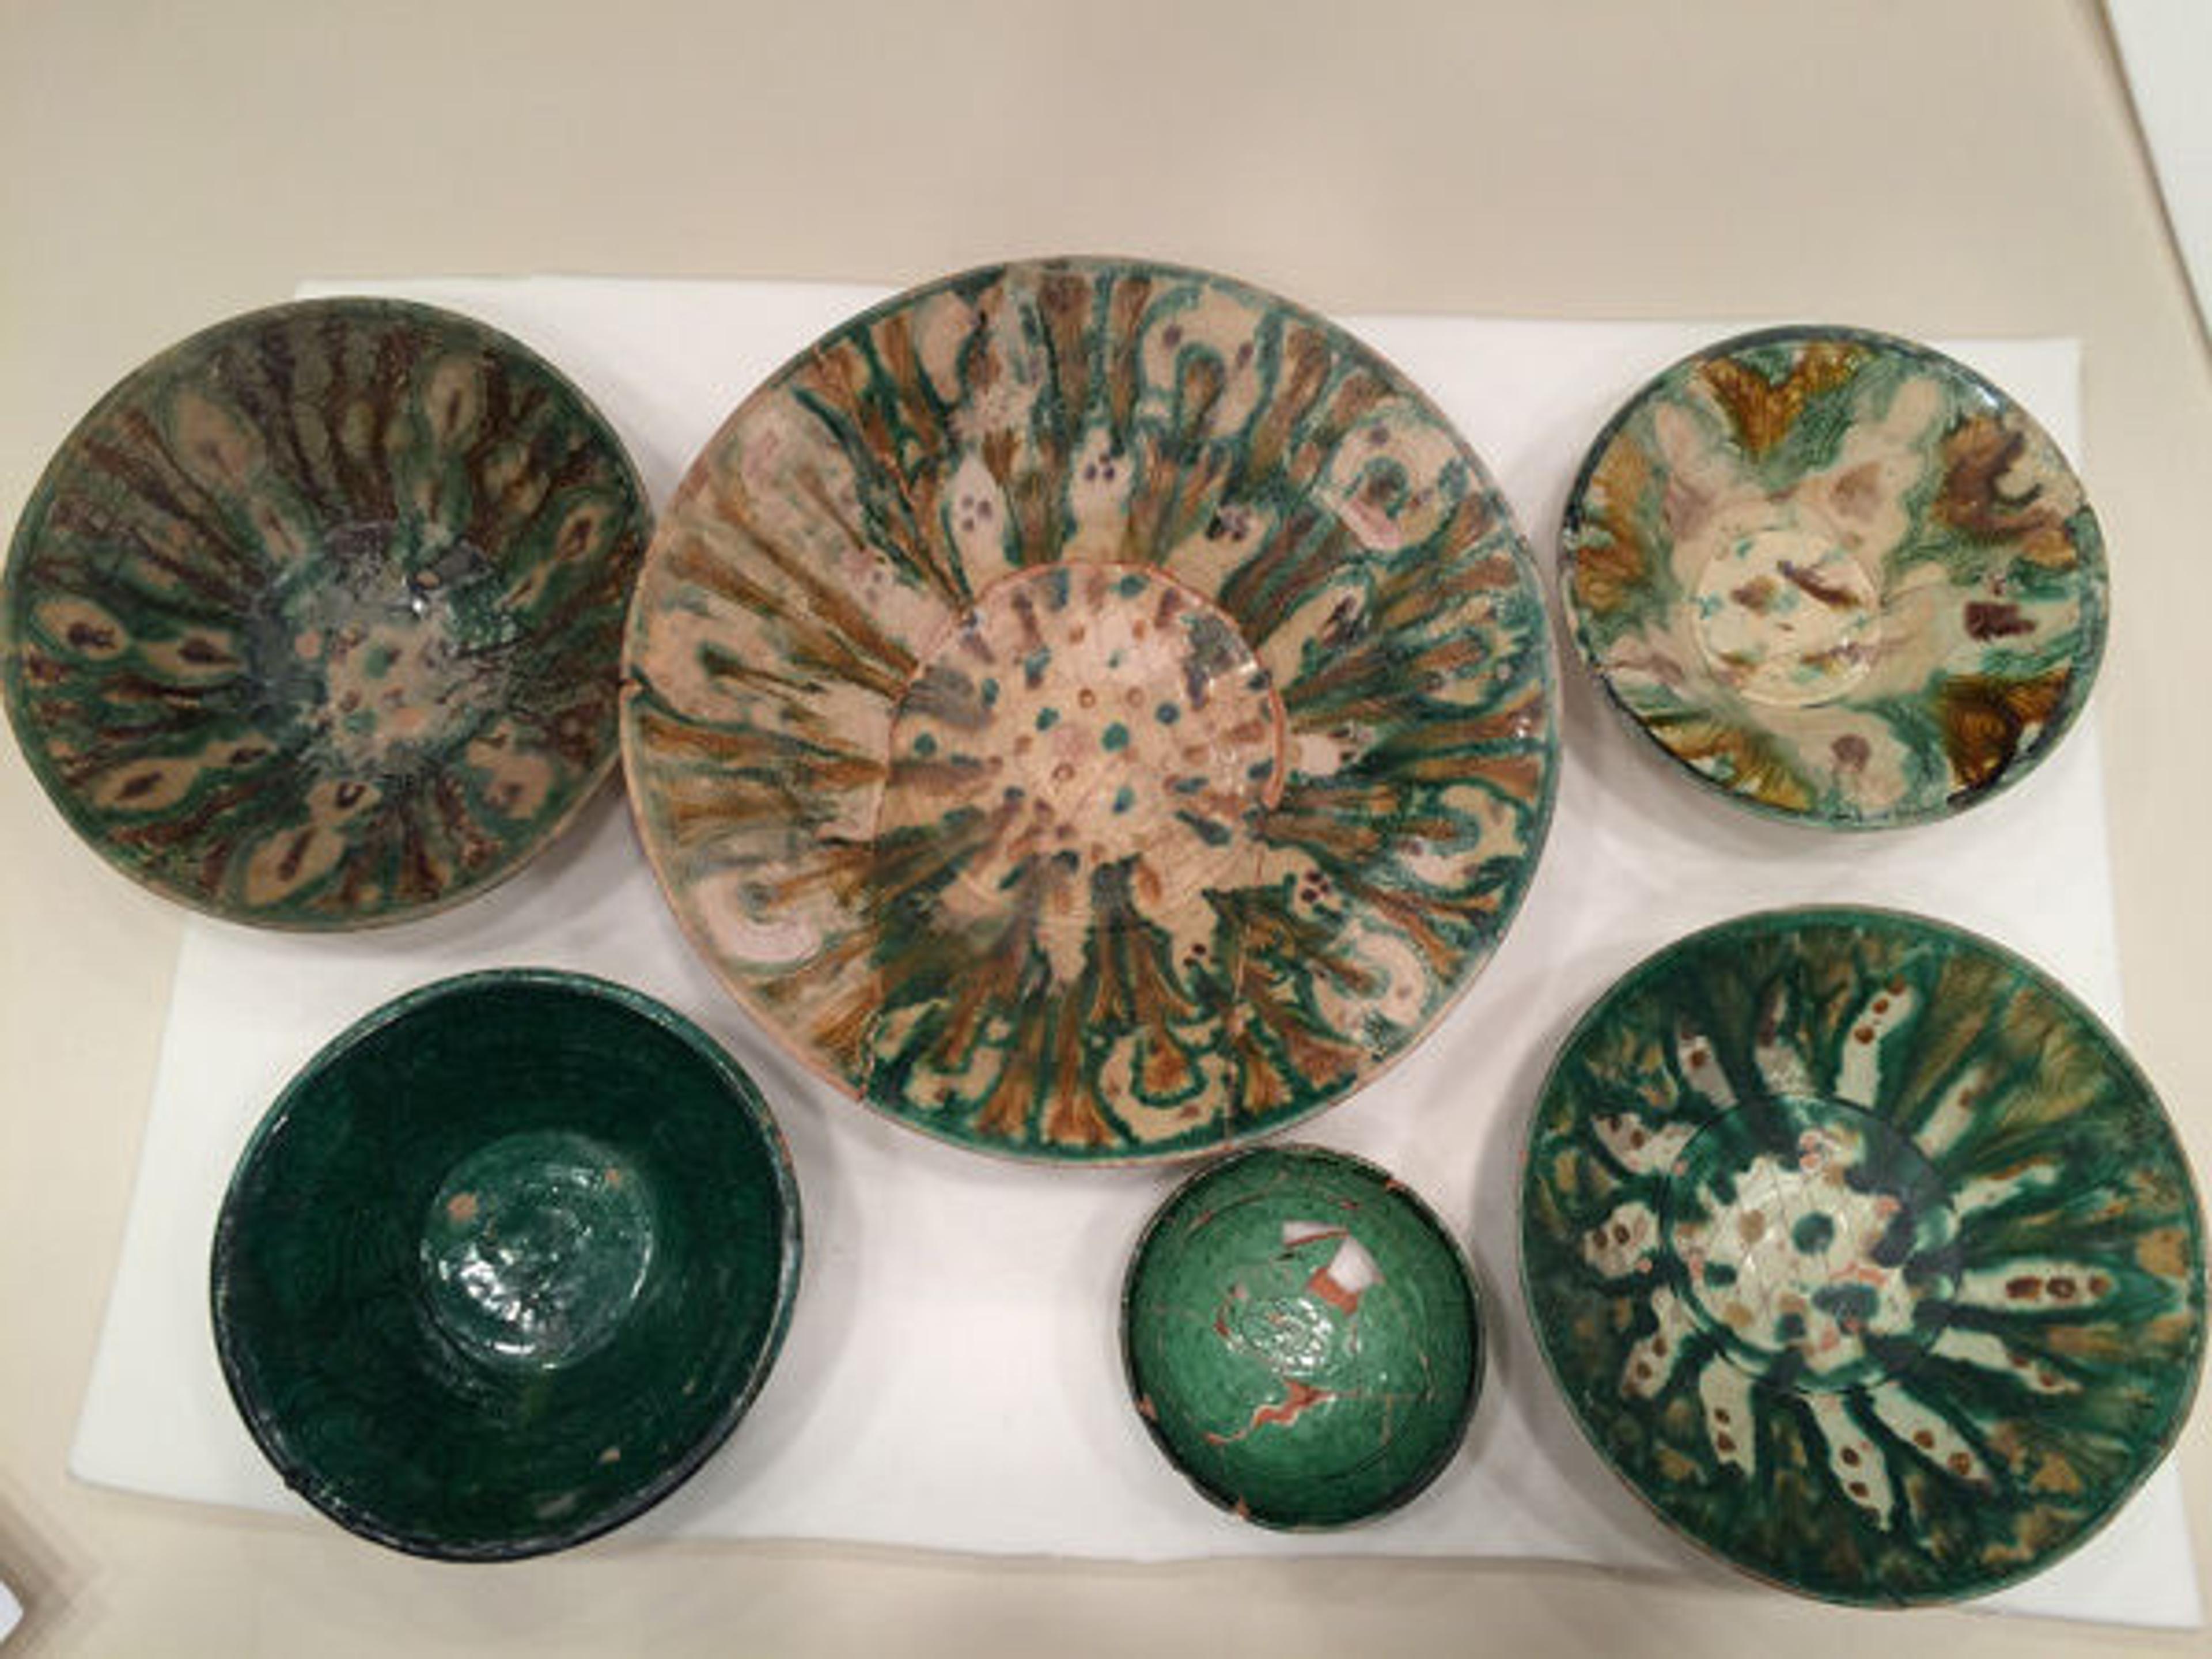 A selection of bowls from the Nishapur collection. All photos courtesy of the author